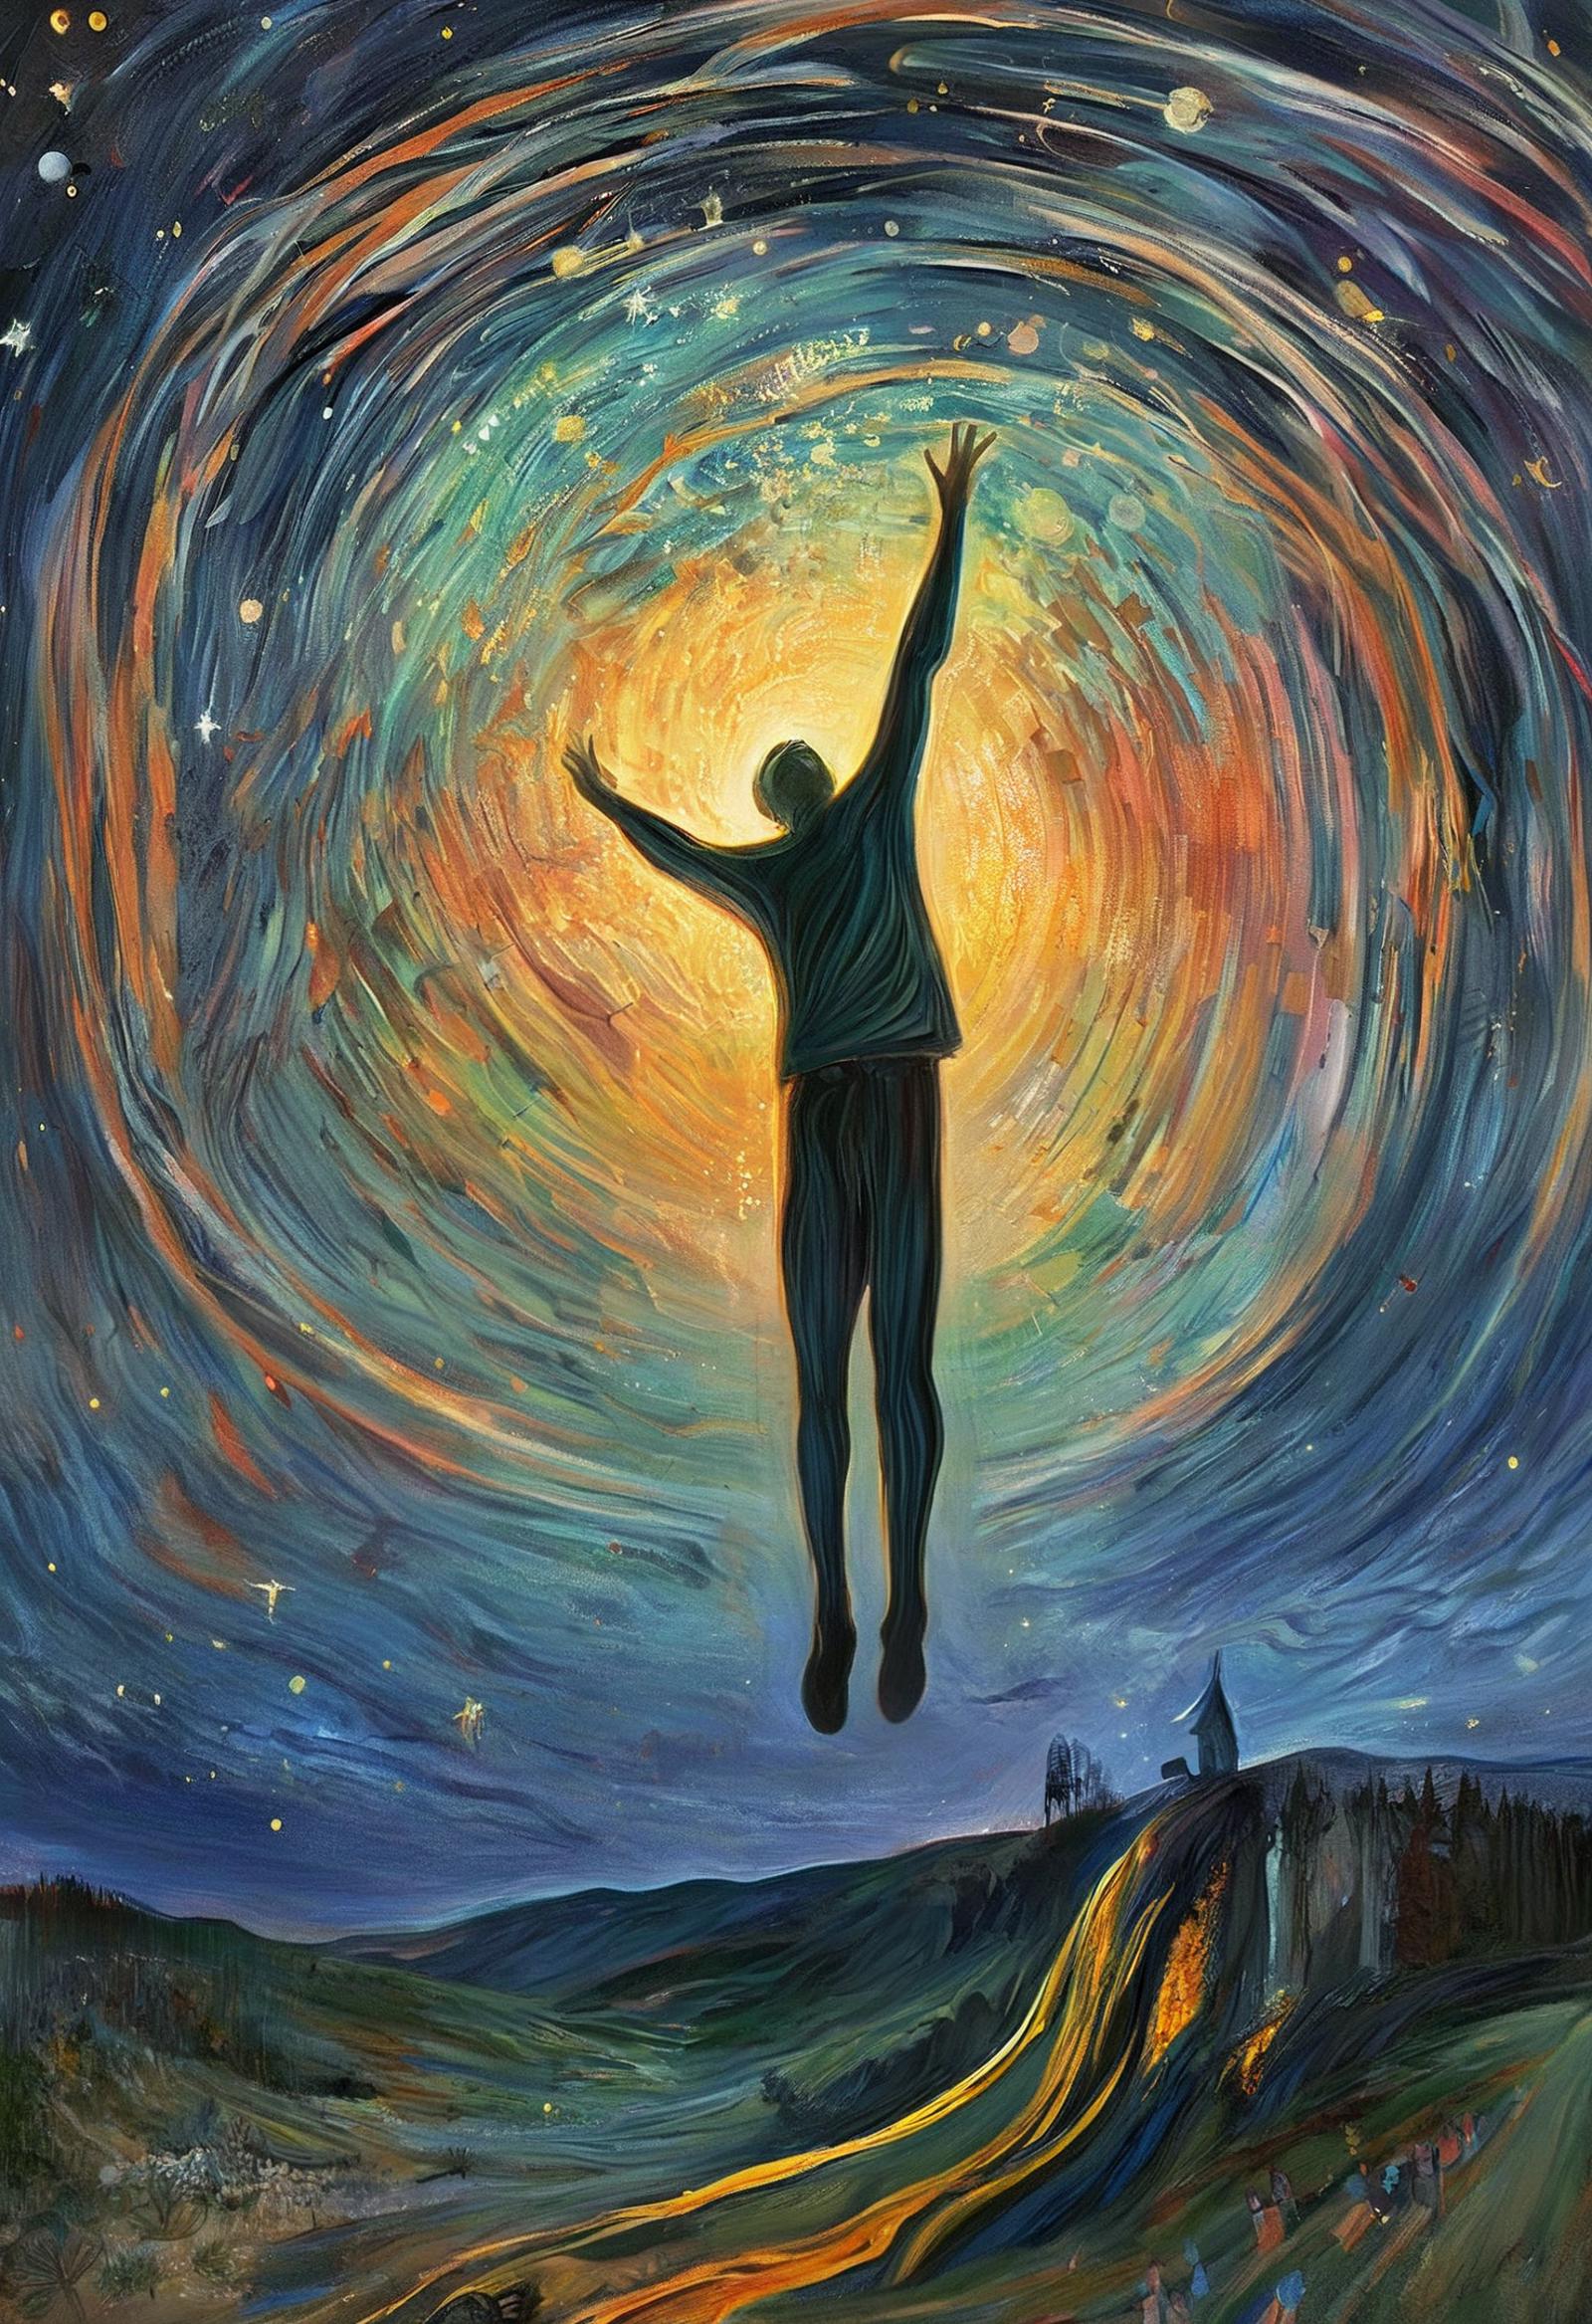 A person reaching for the sky with their arms outstretched, surrounded by a colorful and vibrant background.